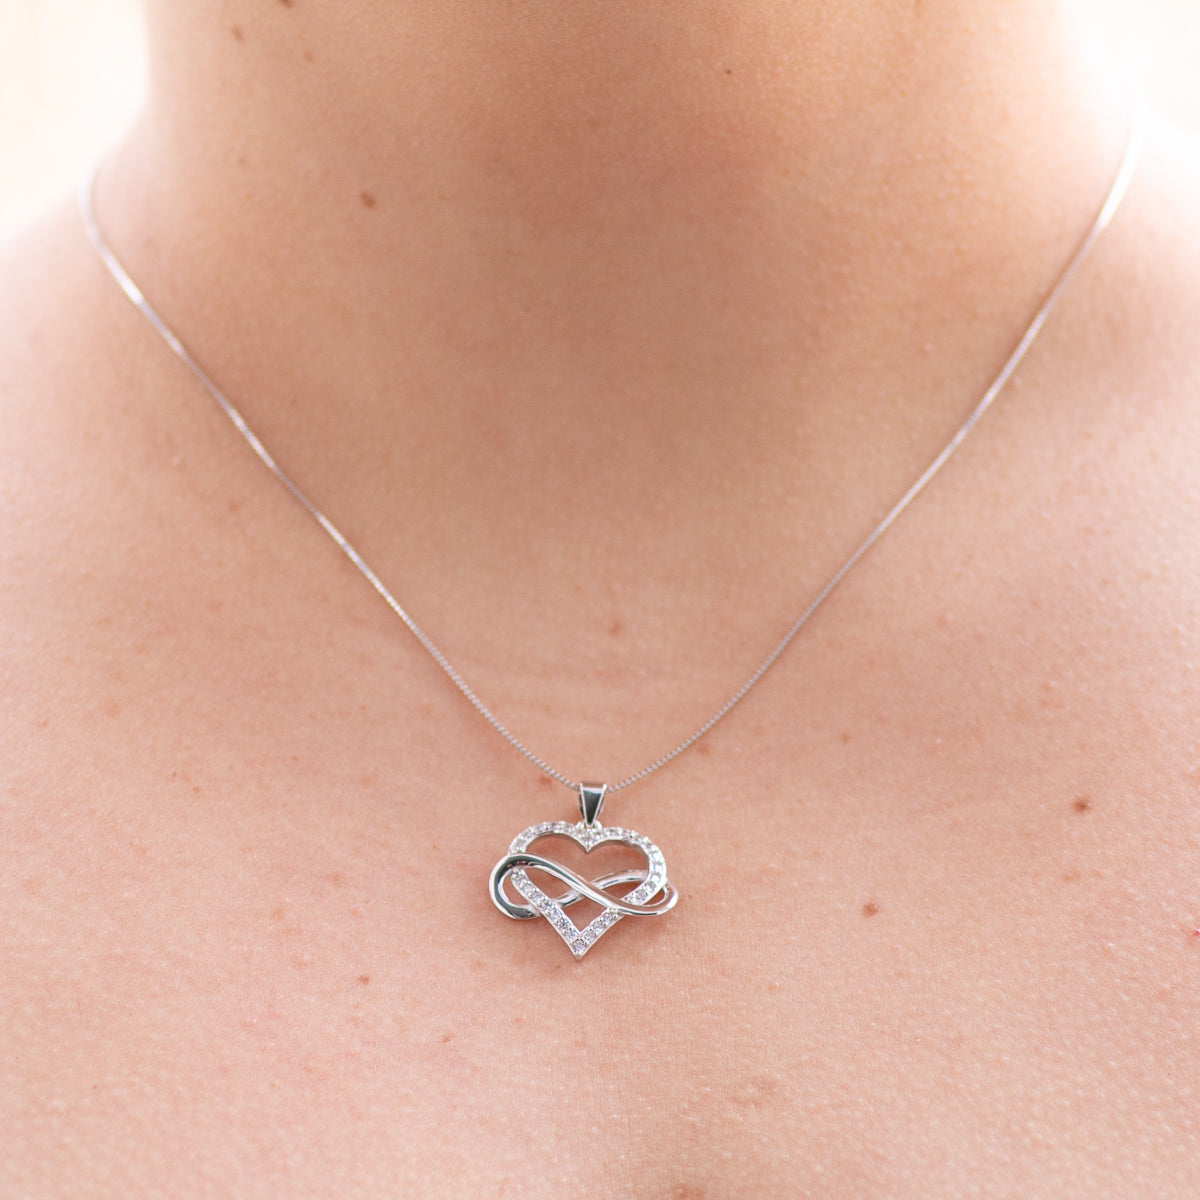 Straighten Your Crown Infinity Heart Silver Necklace - Wife